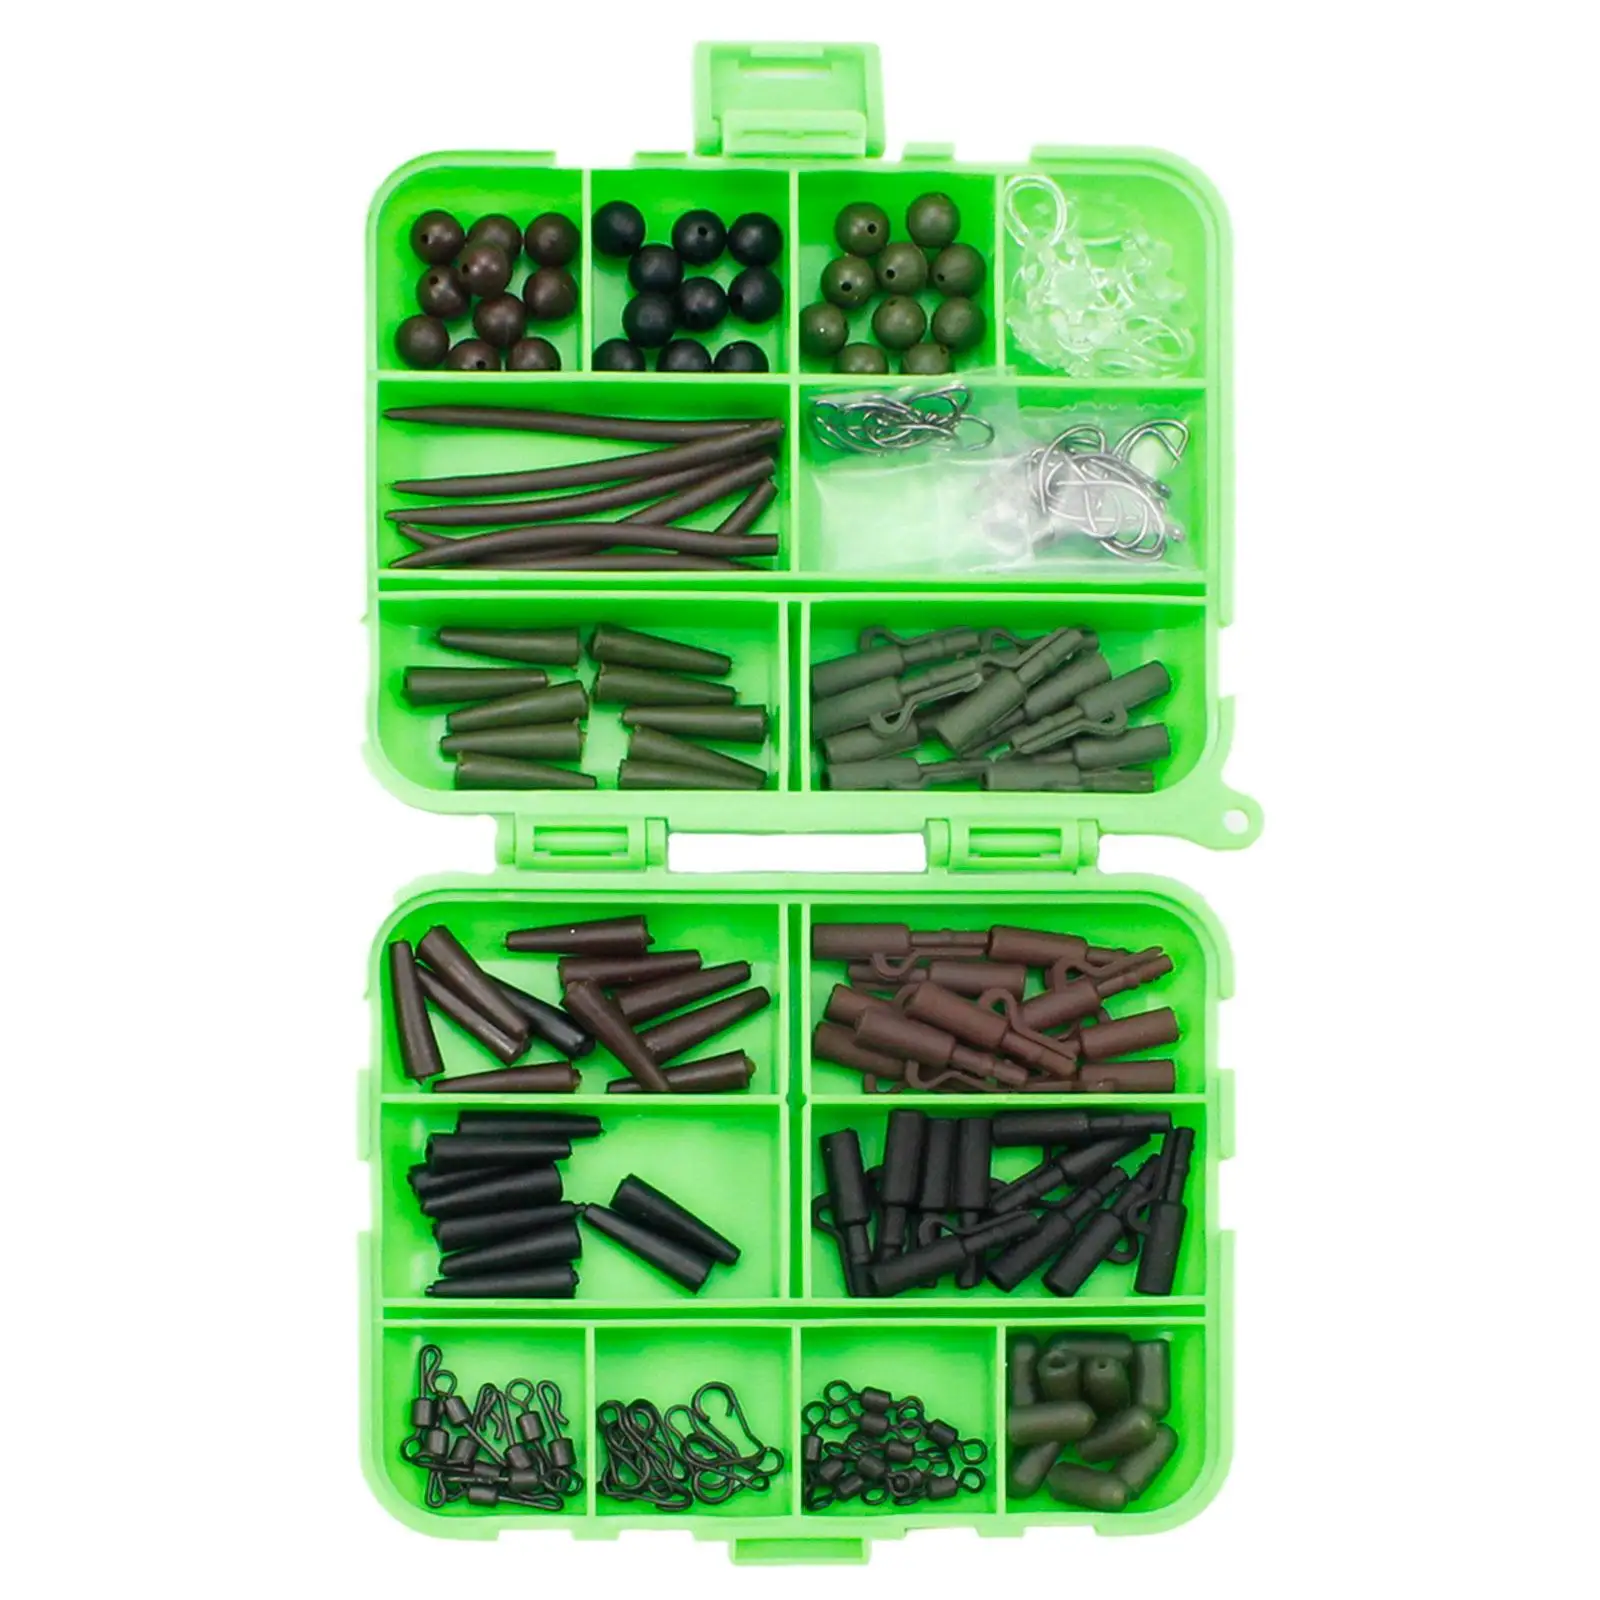 Carp Fishing Tackle Kits Tail Rubber Clips W/ Portable Cases Link Swivel Quick Change for Carp Bait Rigs Coarse Fishing Gear